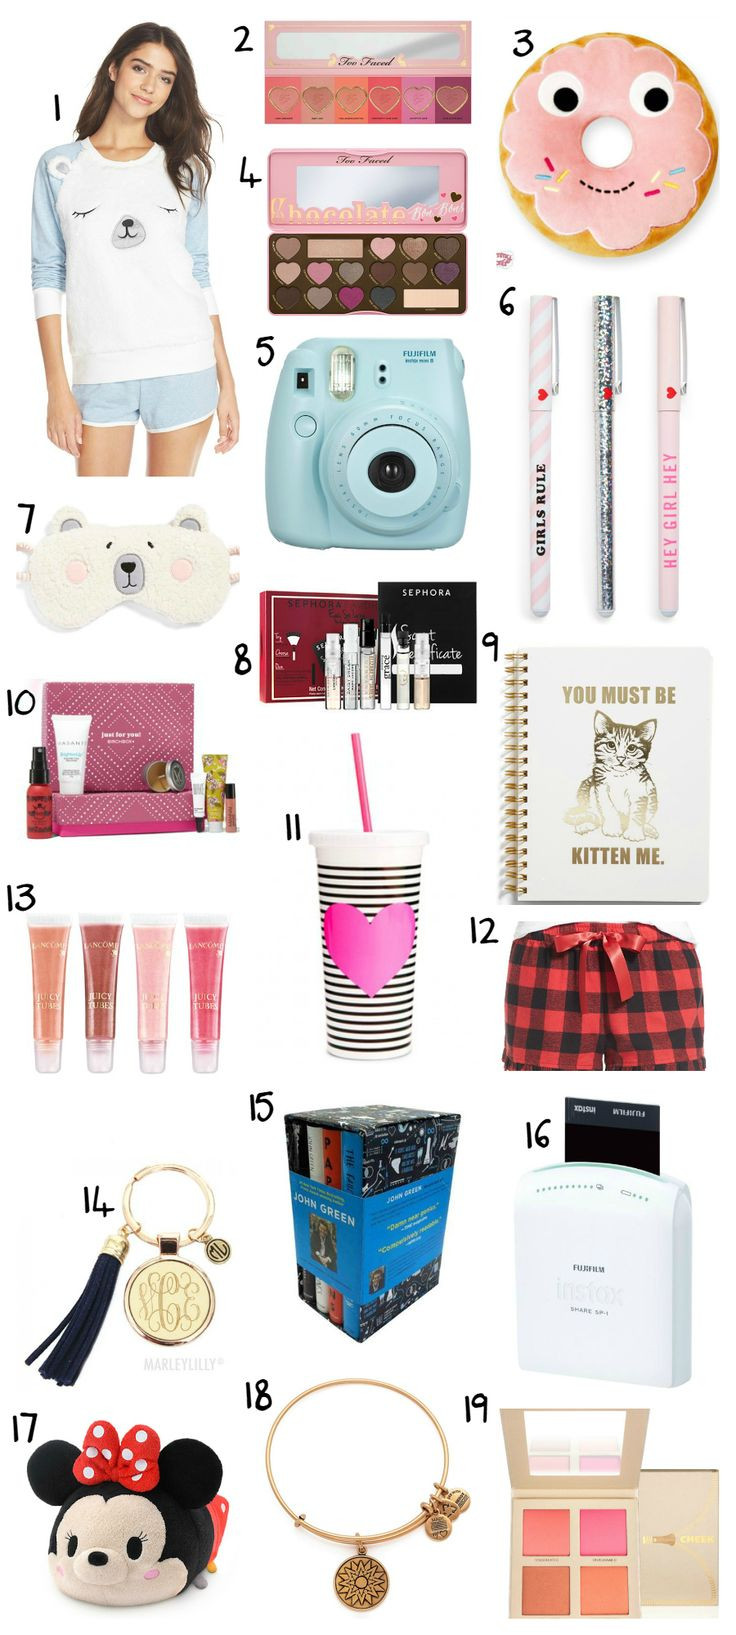 Teenage Girlfriend Gift Ideas
 9 best Gifts For Teen Girls images on Pinterest